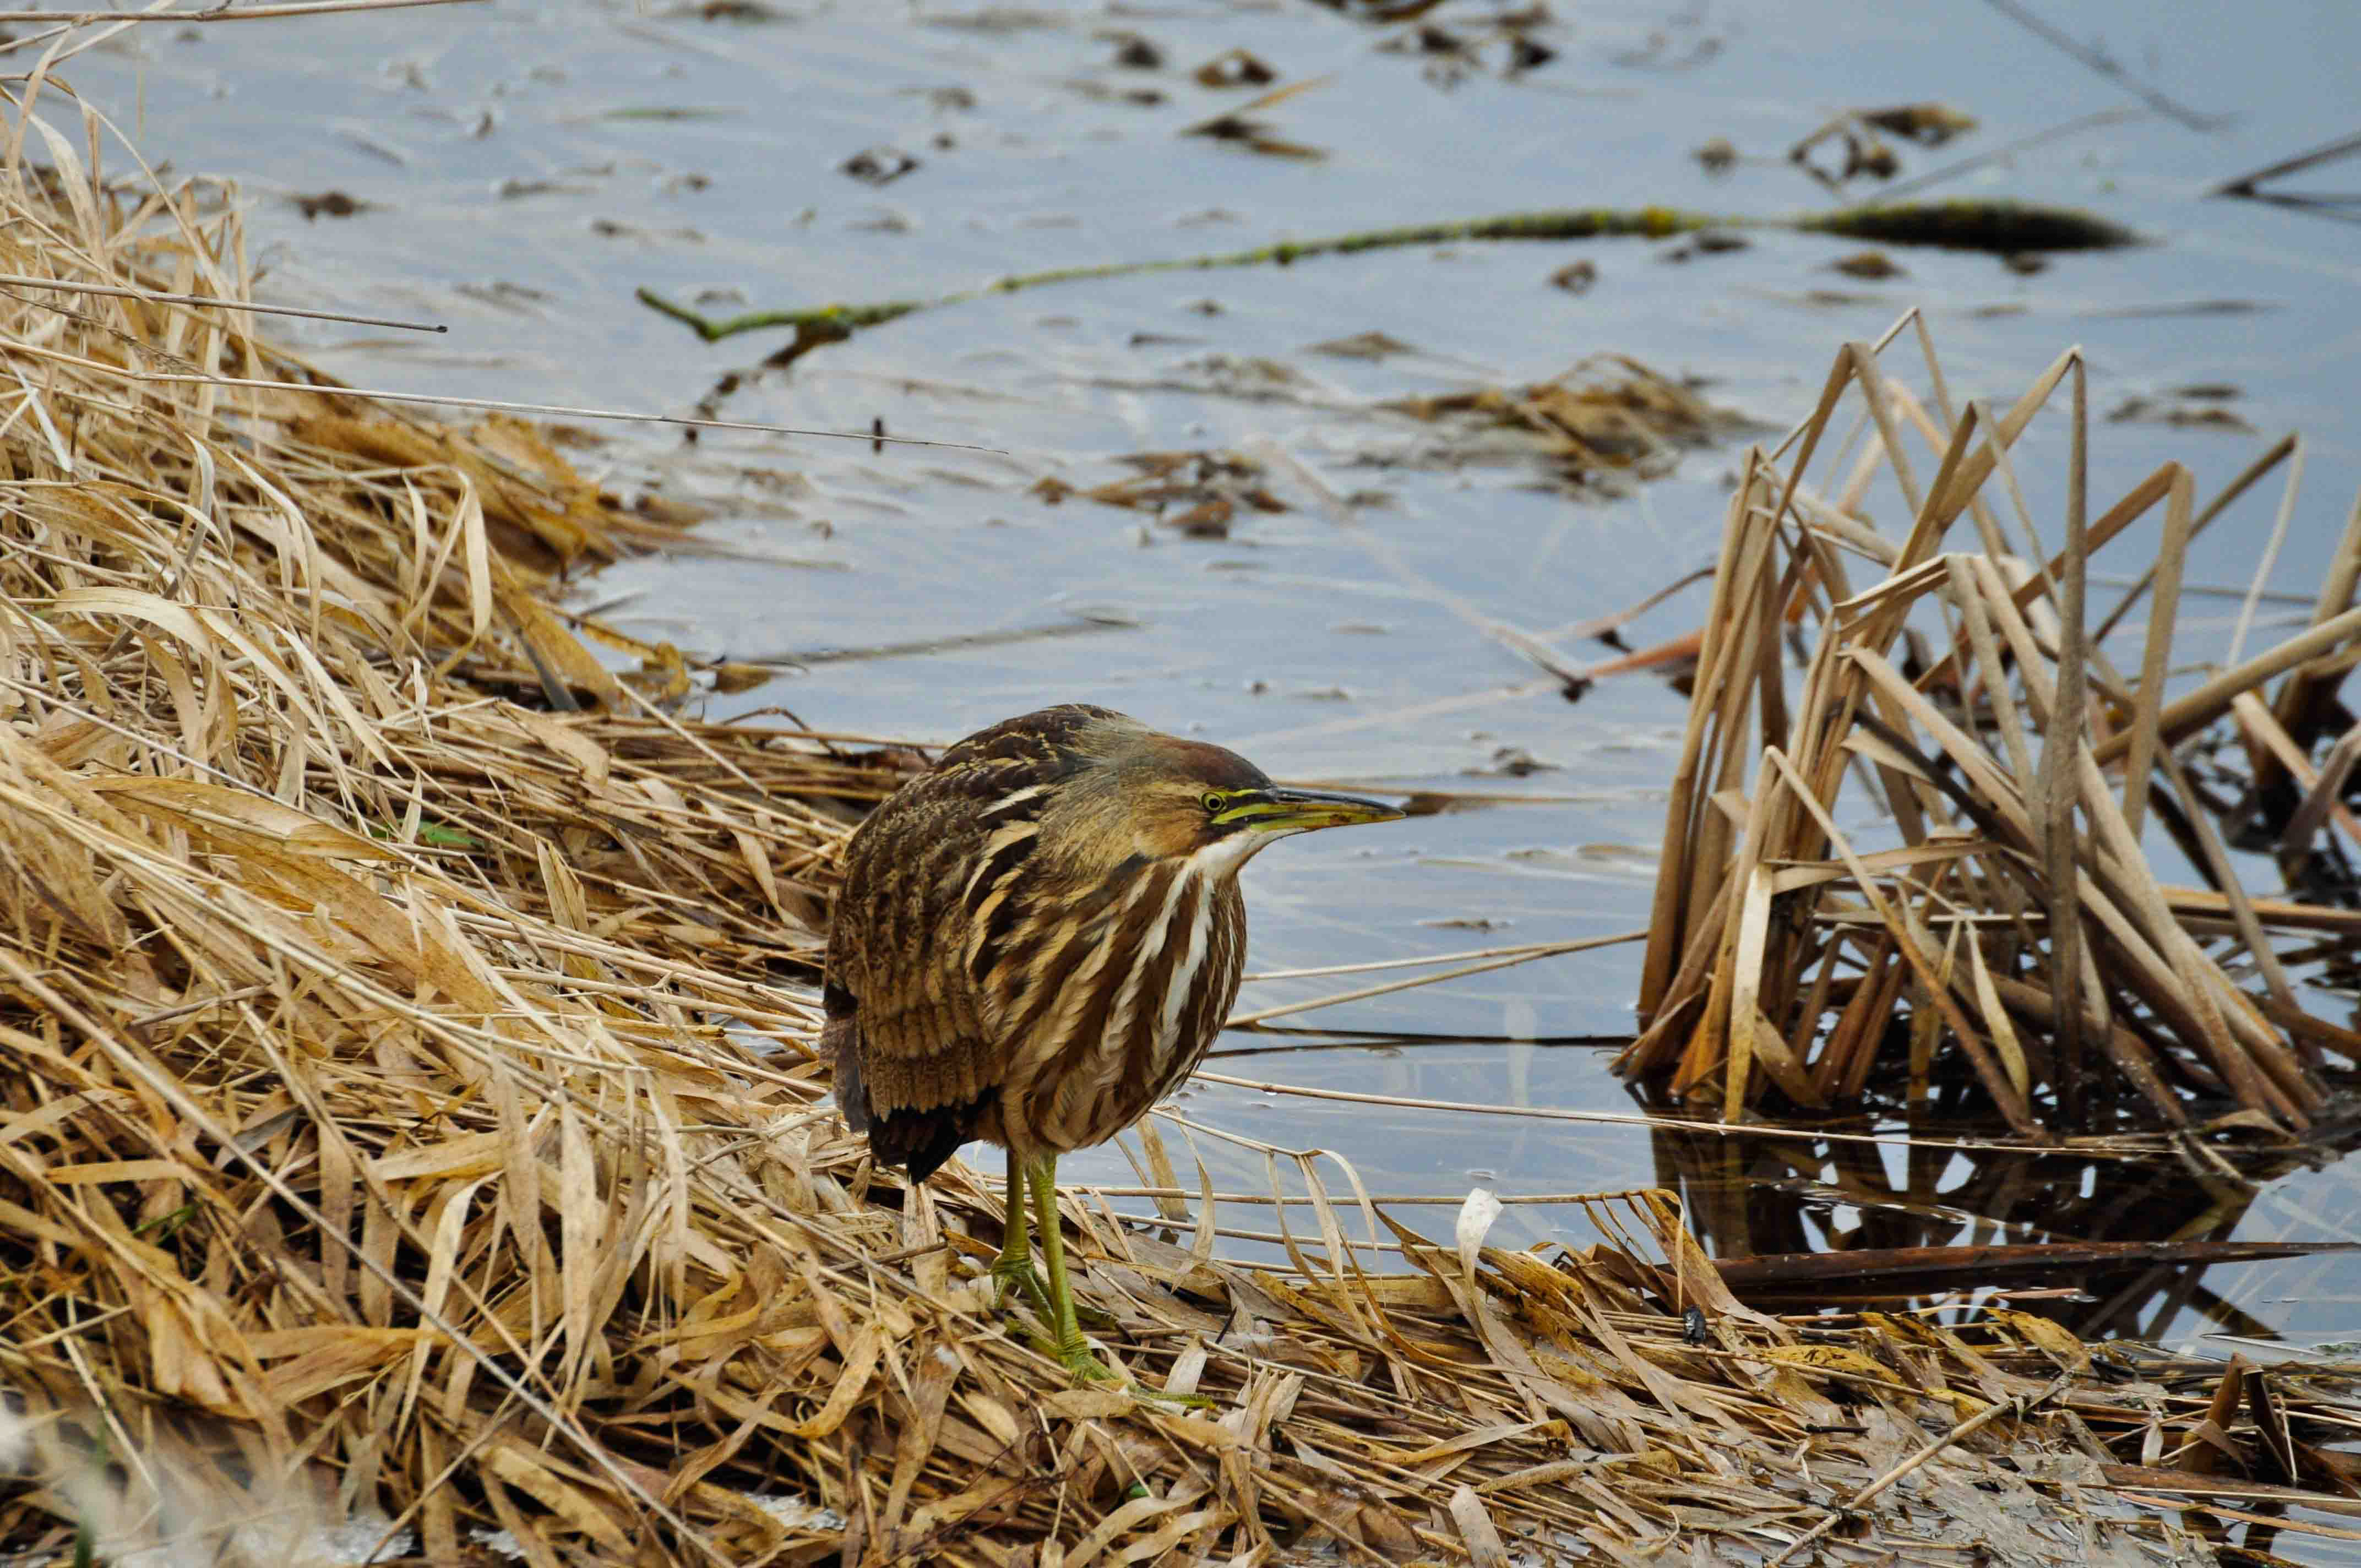 American Bittern crouched in reeds next to the water. 